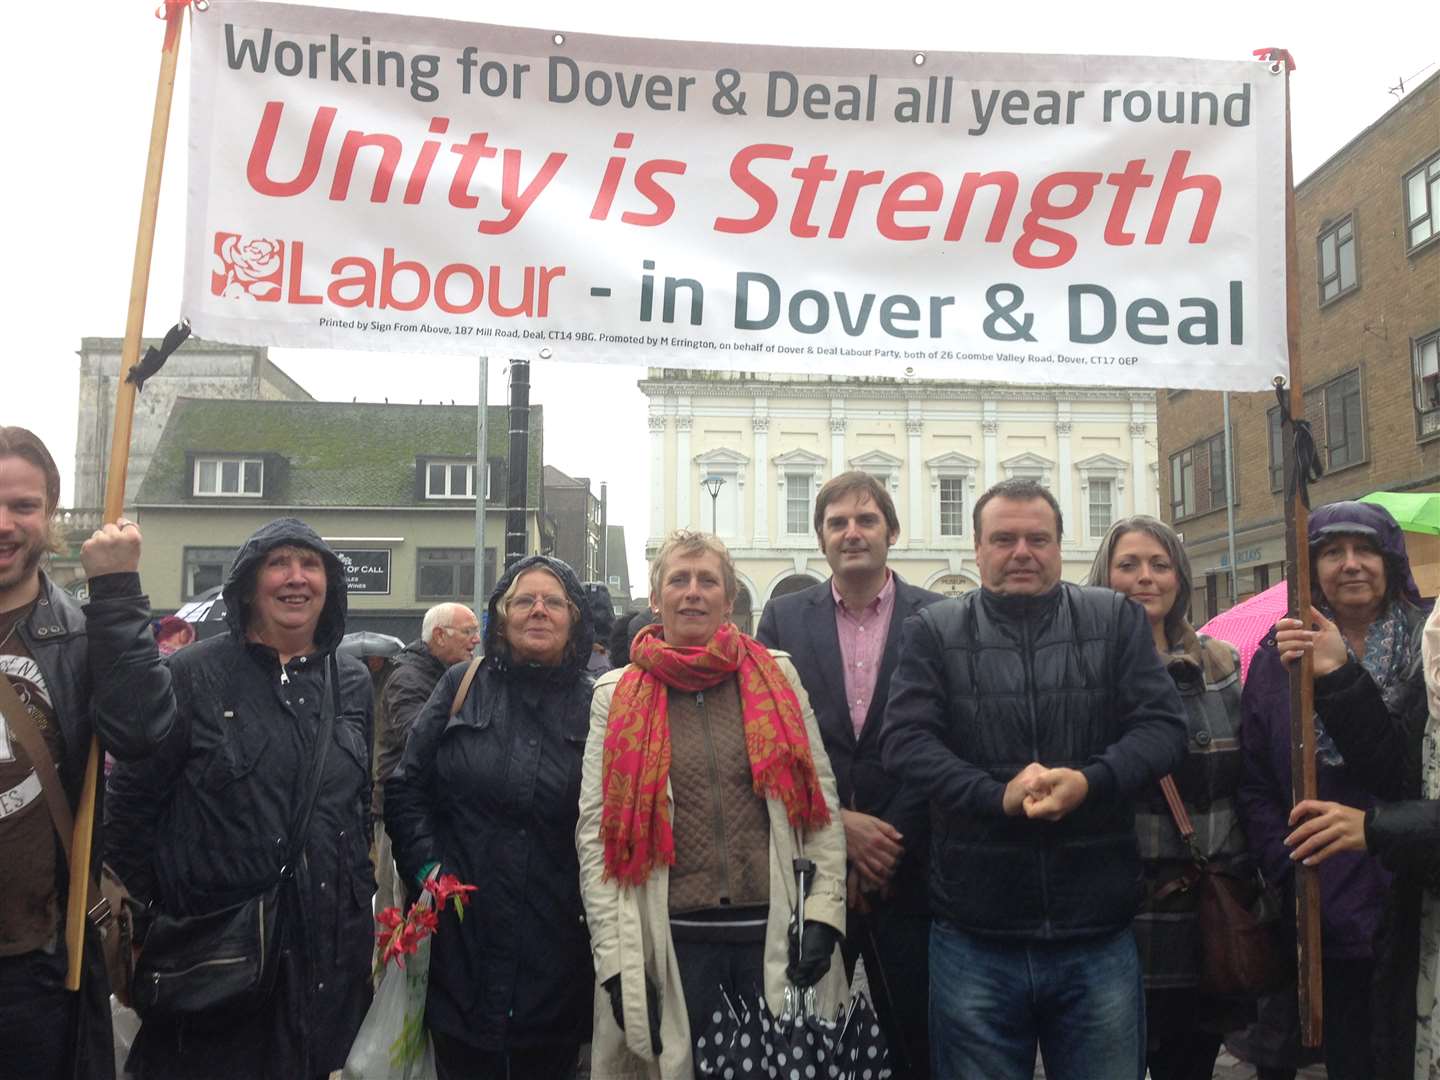 Members of Dover and Deal Labour Party proud to say they welcome migrants